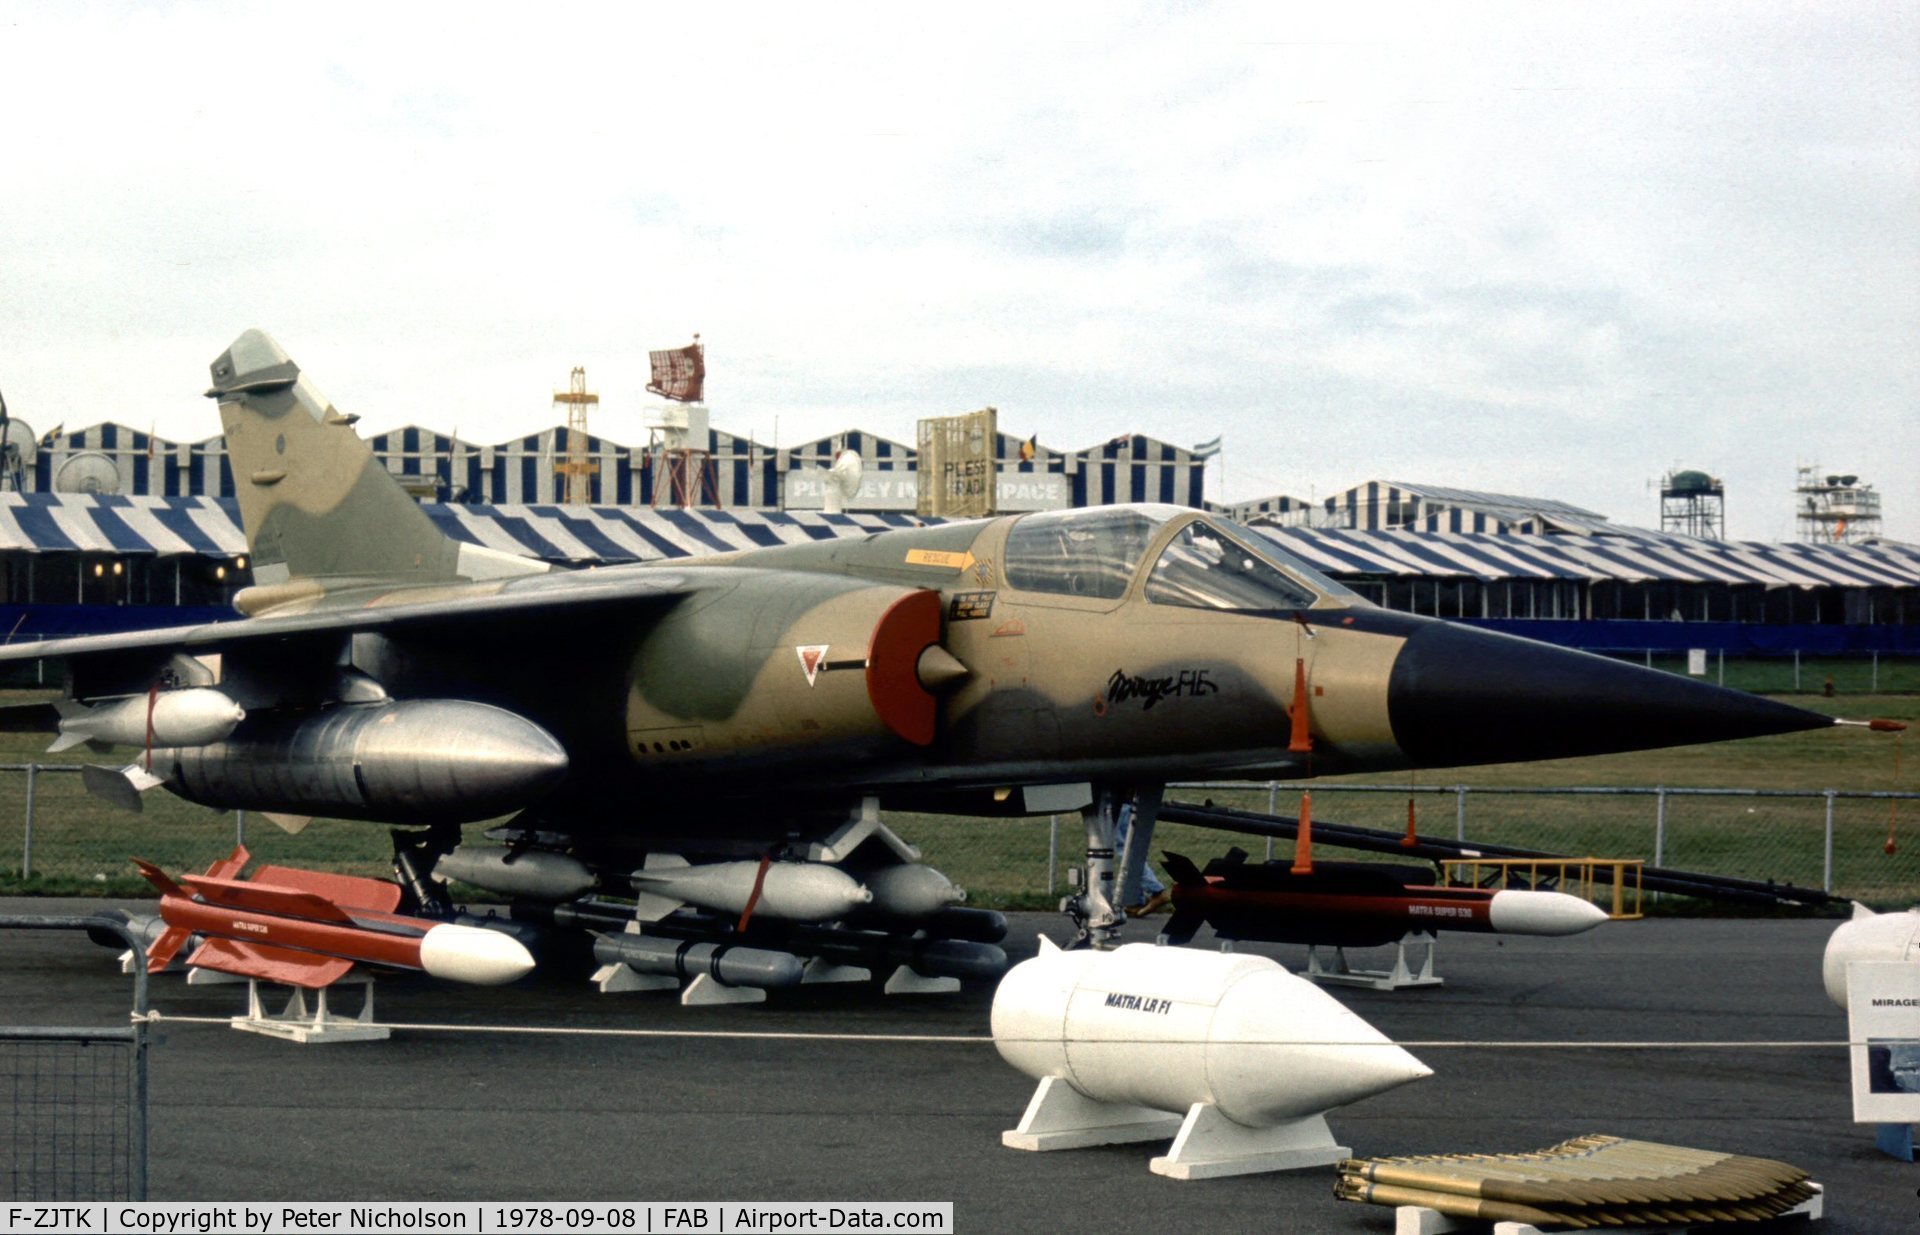 F-ZJTK, Dassault Mirage F.1E C/N 5, Another view of Mirage F.1E c/n 5 at the 1978 Farnborough Airshow.